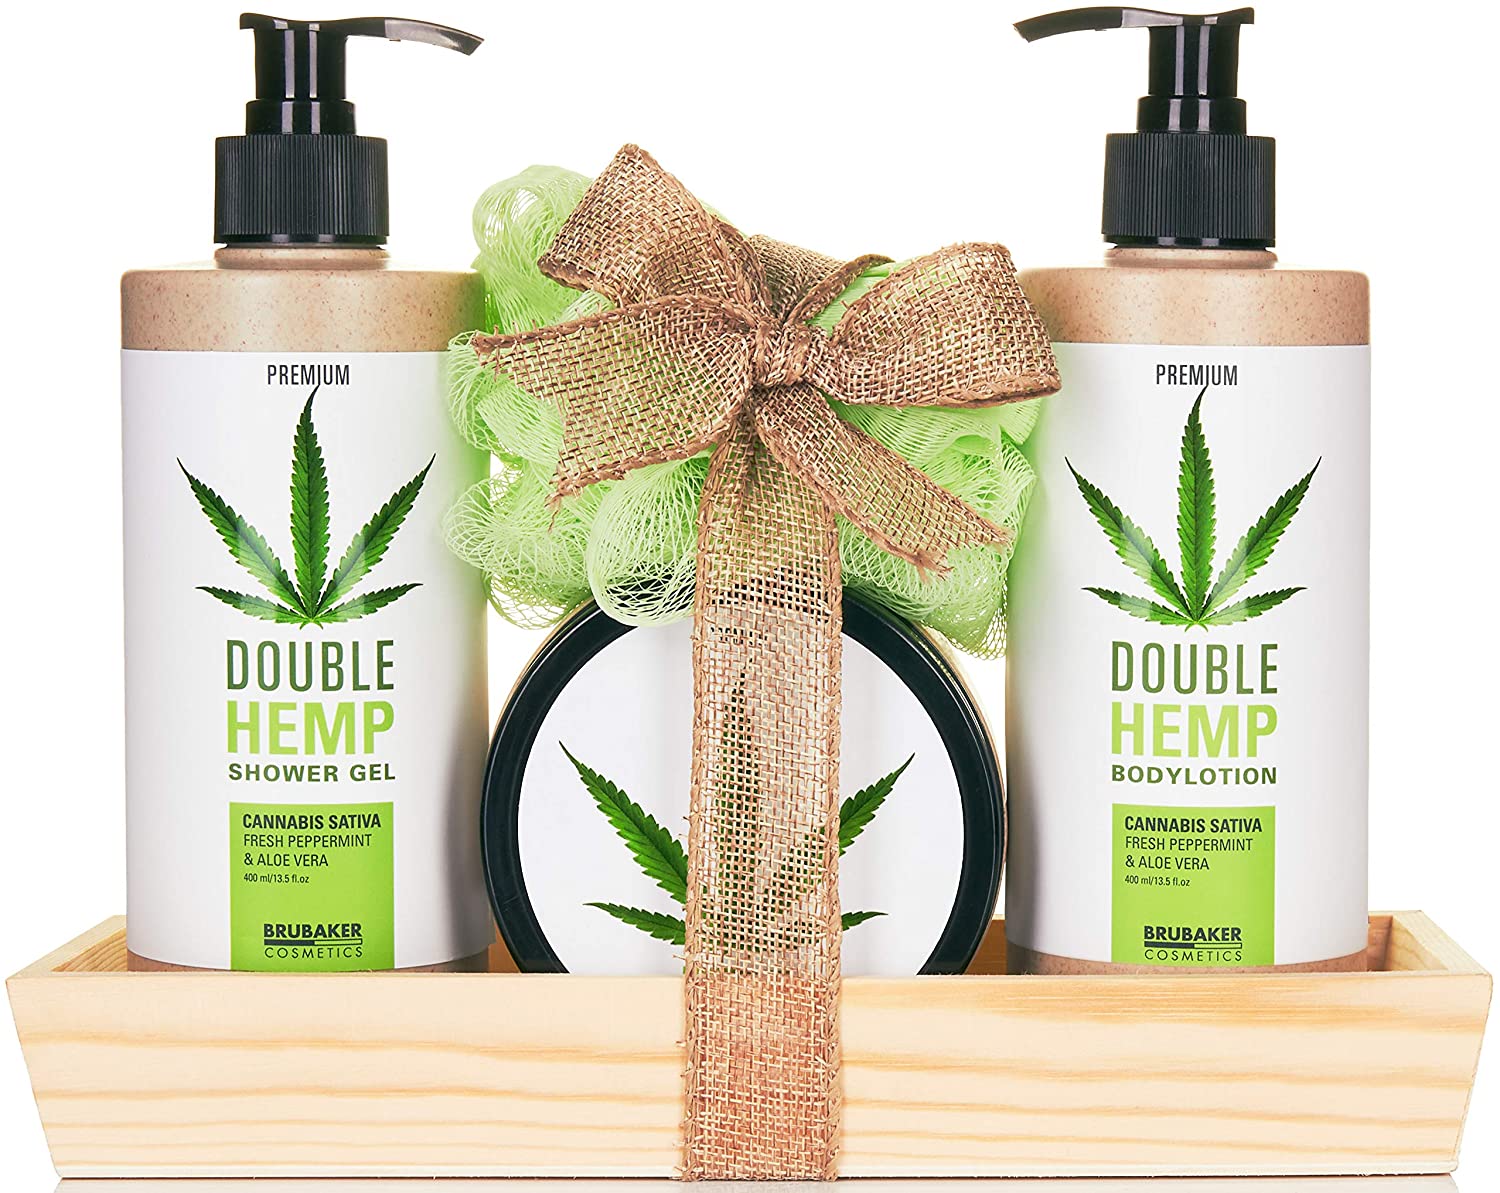 BRUBAKER Cosmetics Hemp Oil Shower and Care Set with Decorative Wooden Tray, White, ‎grün